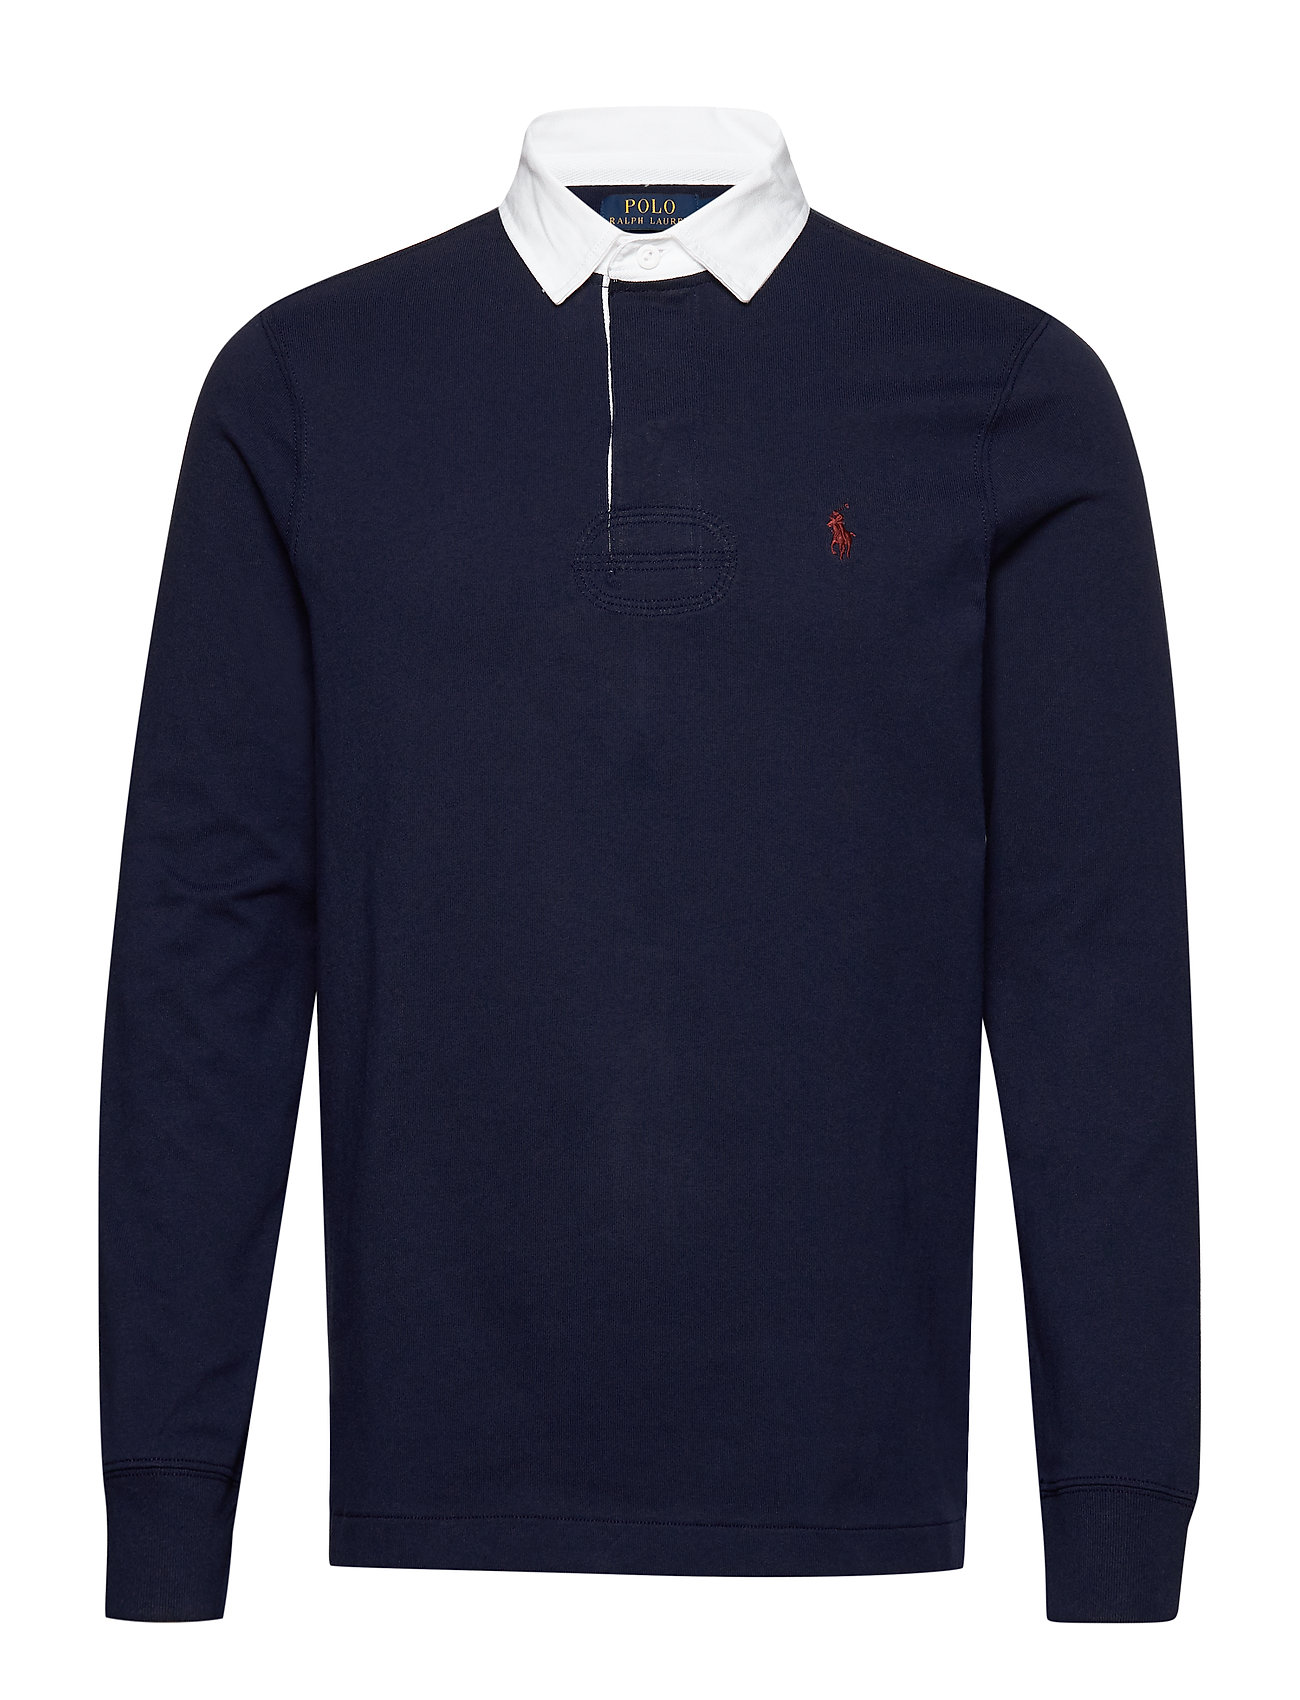 ralph lauren the iconic rugby shirt